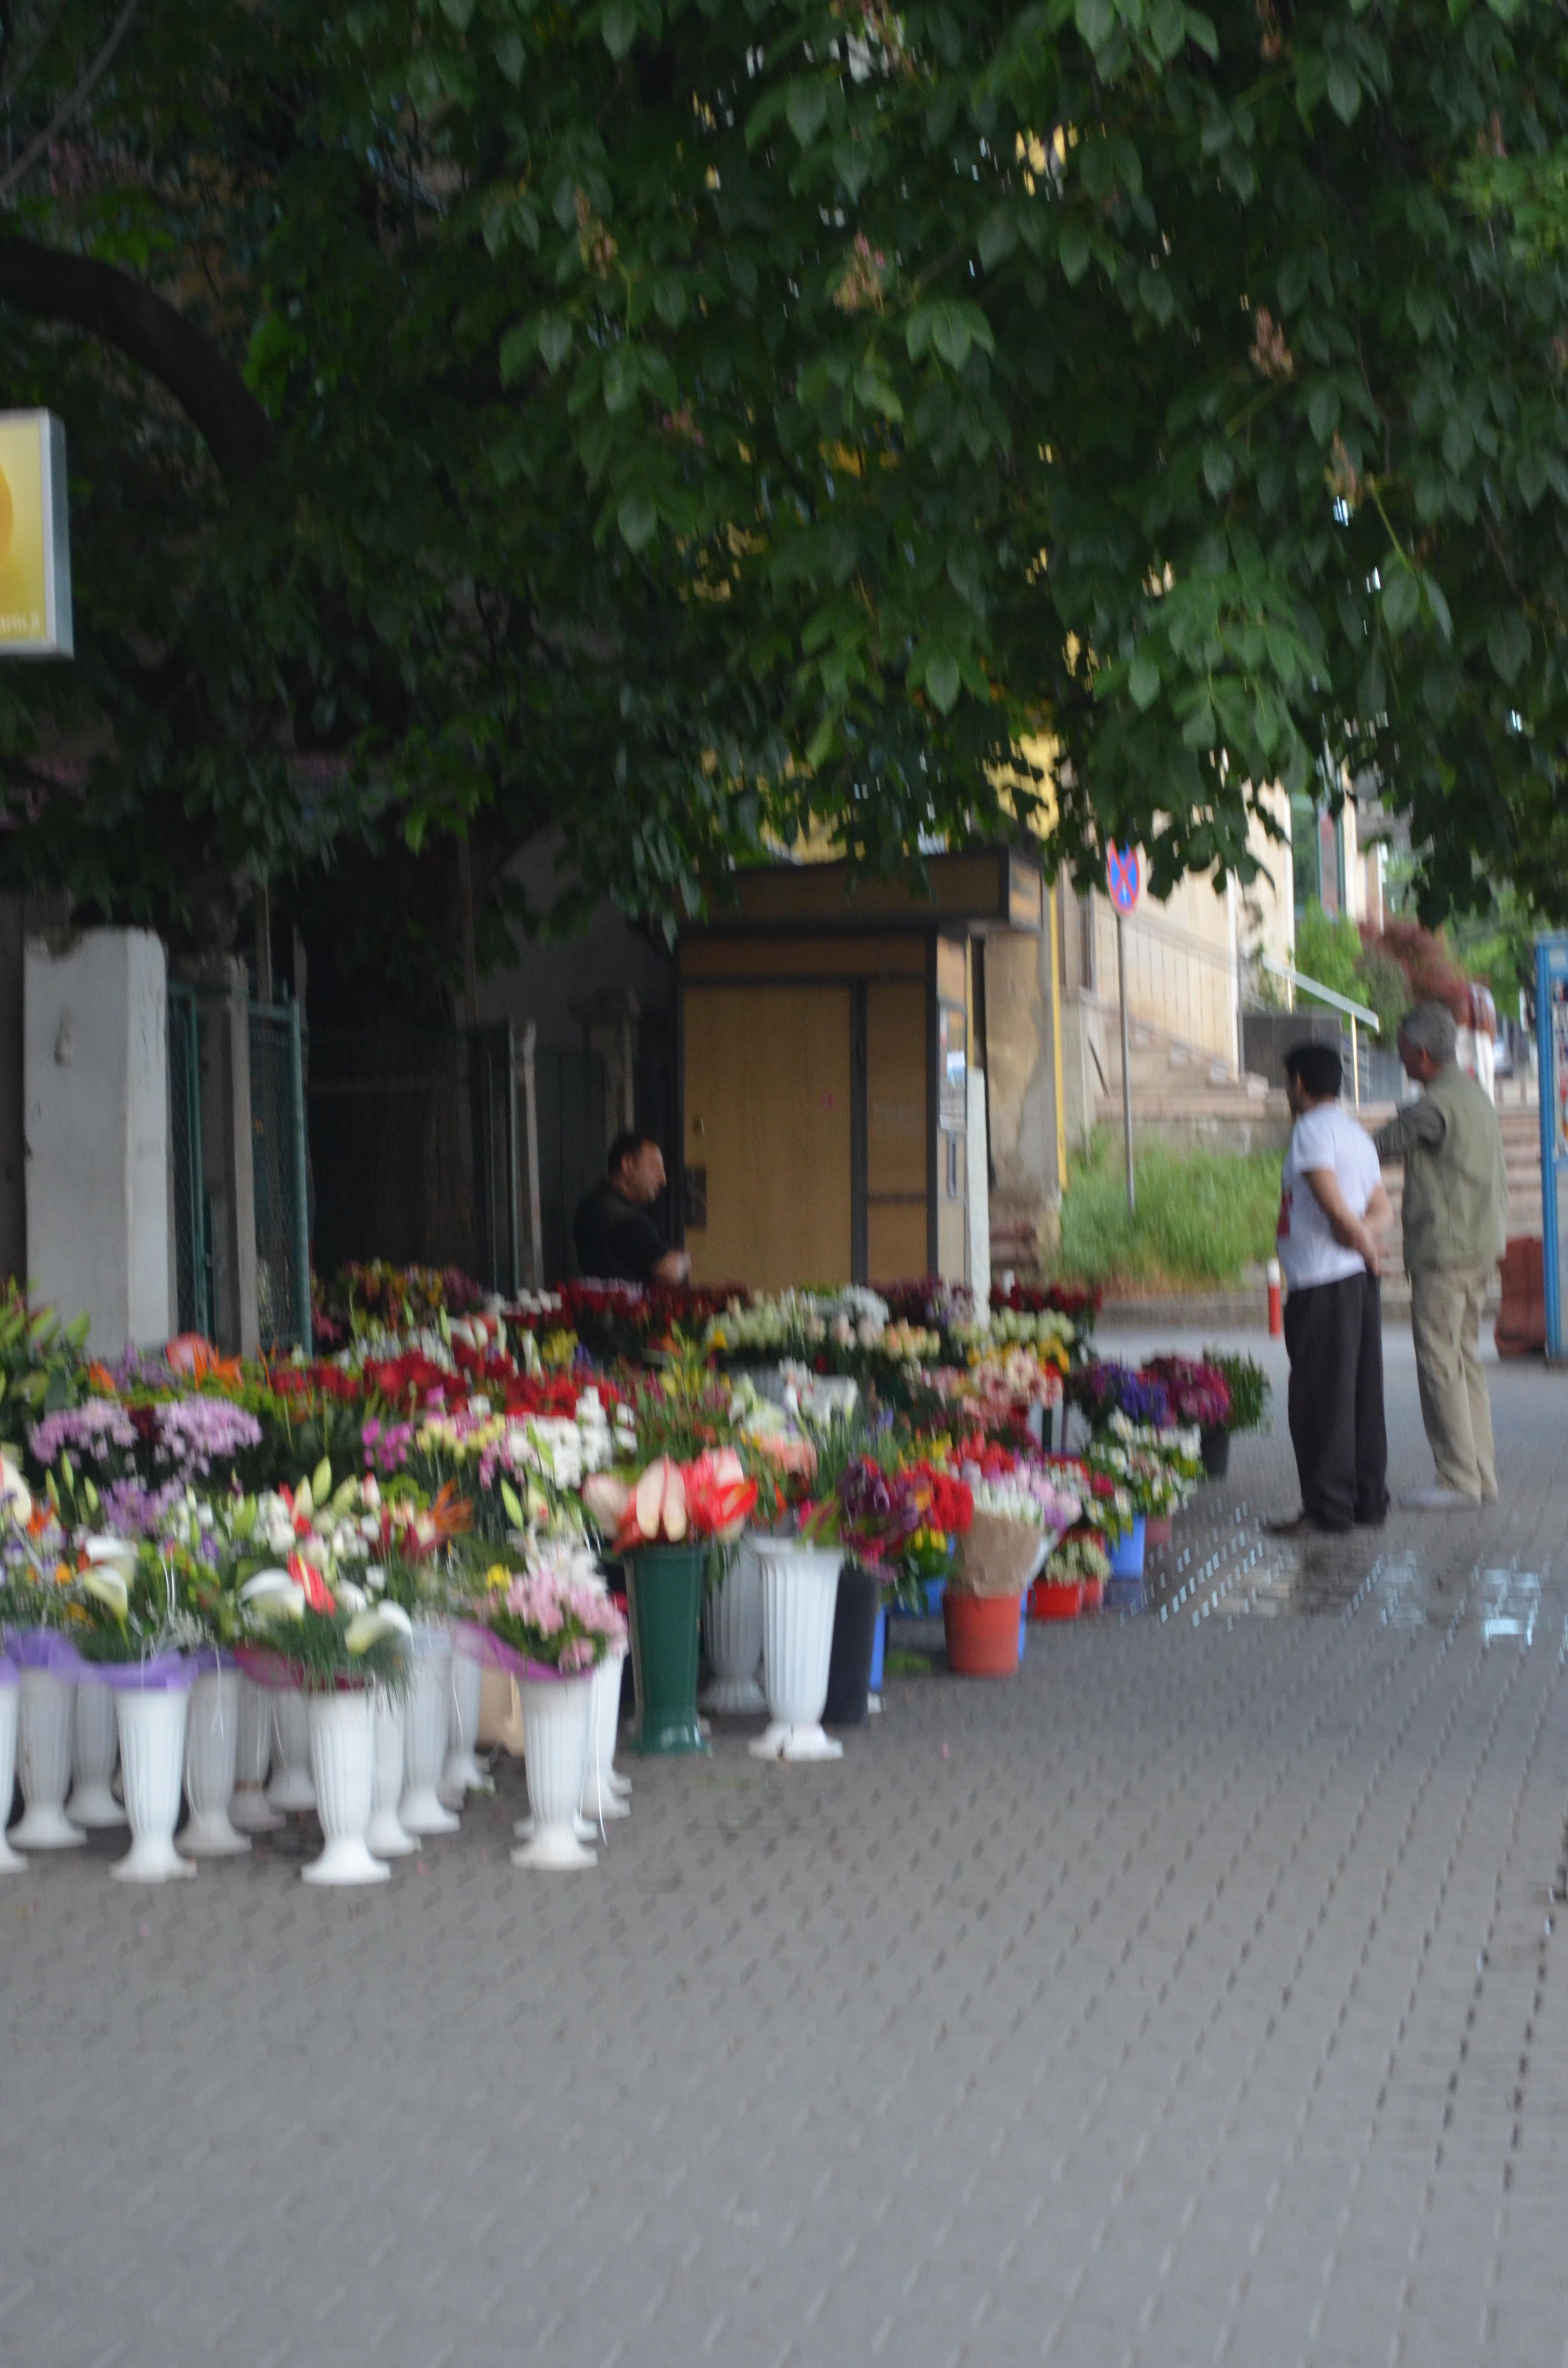 Cover image of this place Flower market